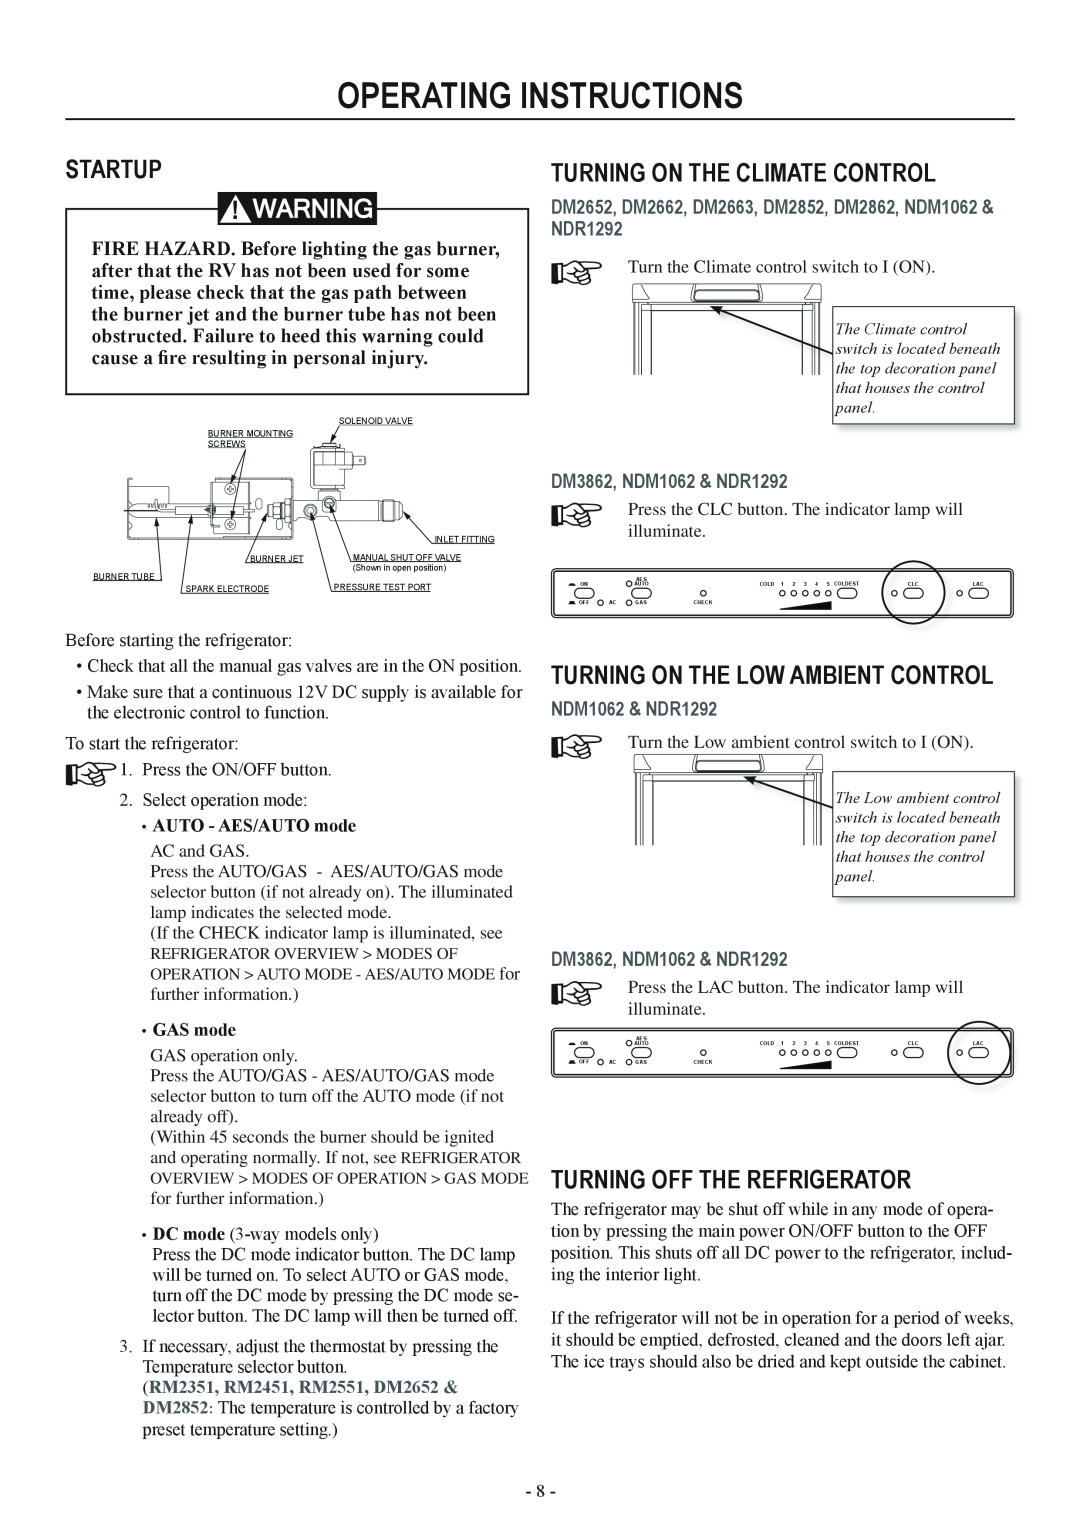 Dometic DM2662, DM2852 operating instructions, Startup, Turning on the climate control, Turning on the low ambient control 